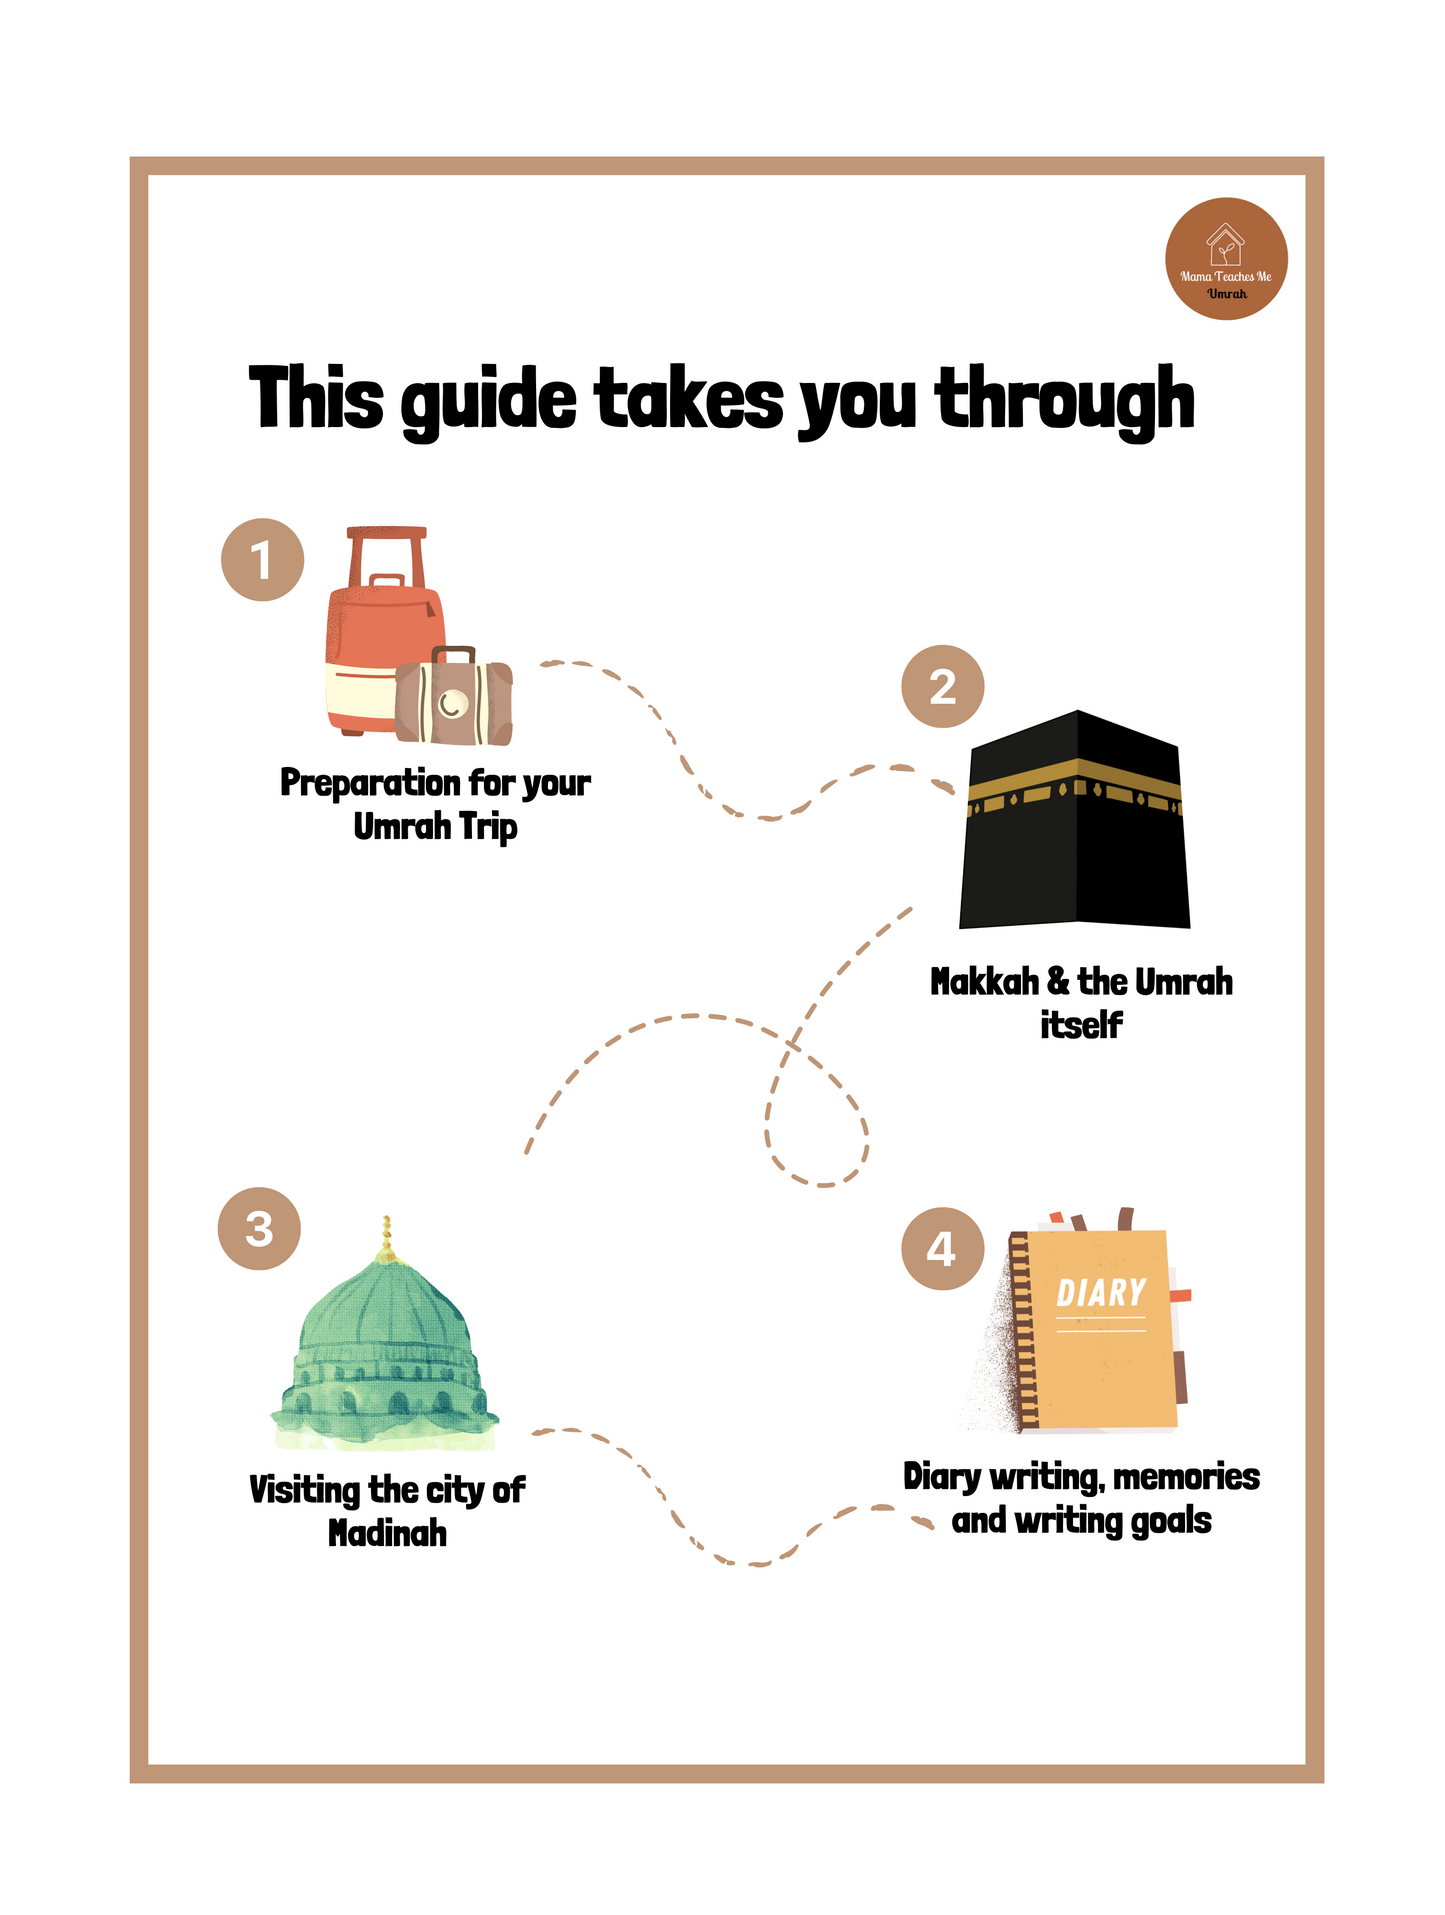 My First Guide To Umrah